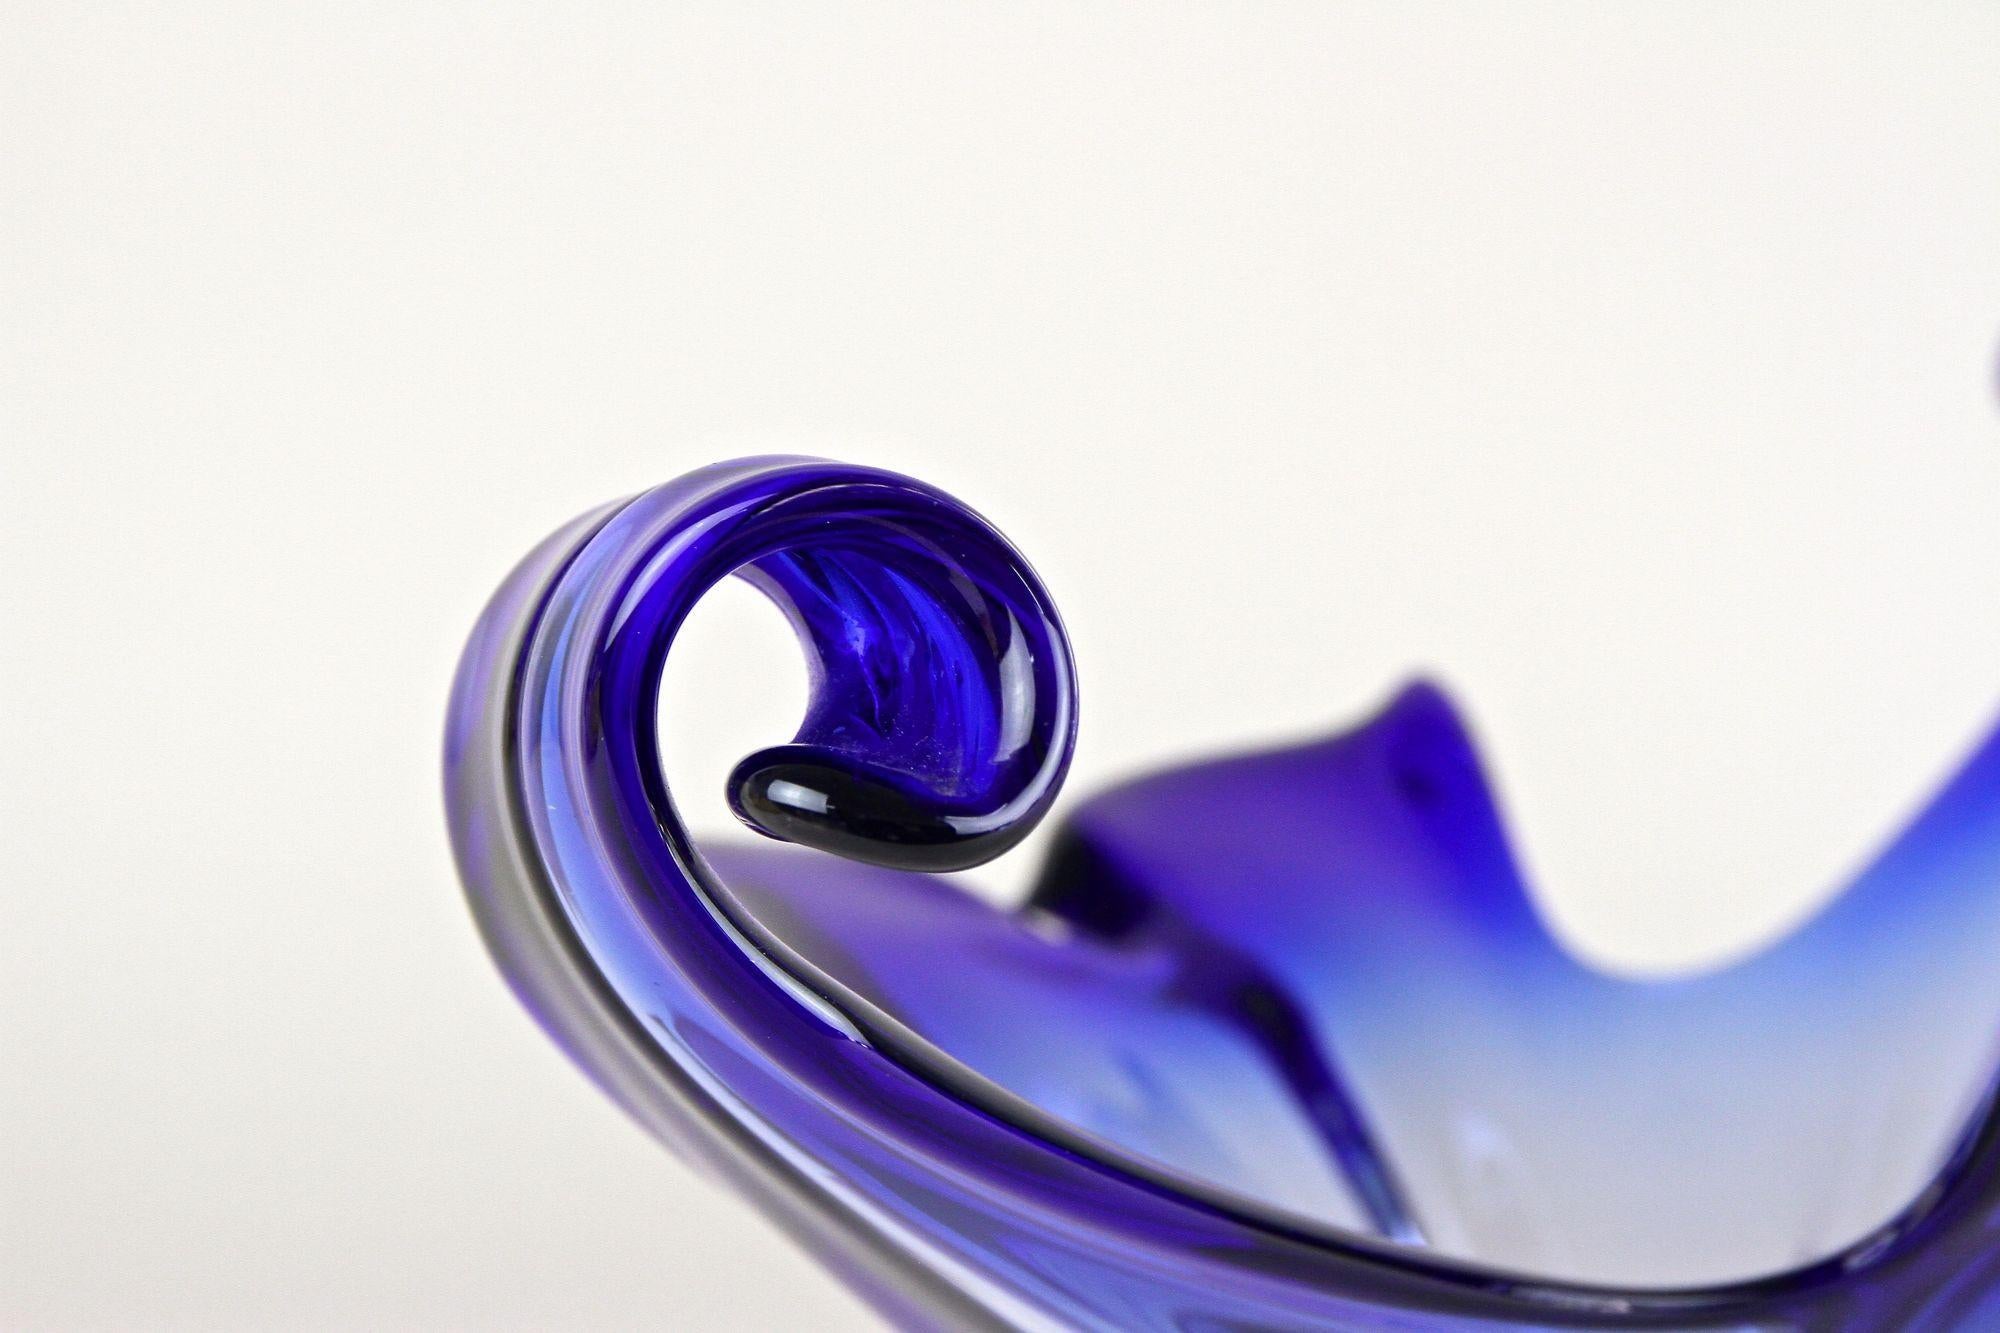 Blue Murano Glass Bowl - Mid-Century Modern, Italy circa 1960/70 For Sale 7